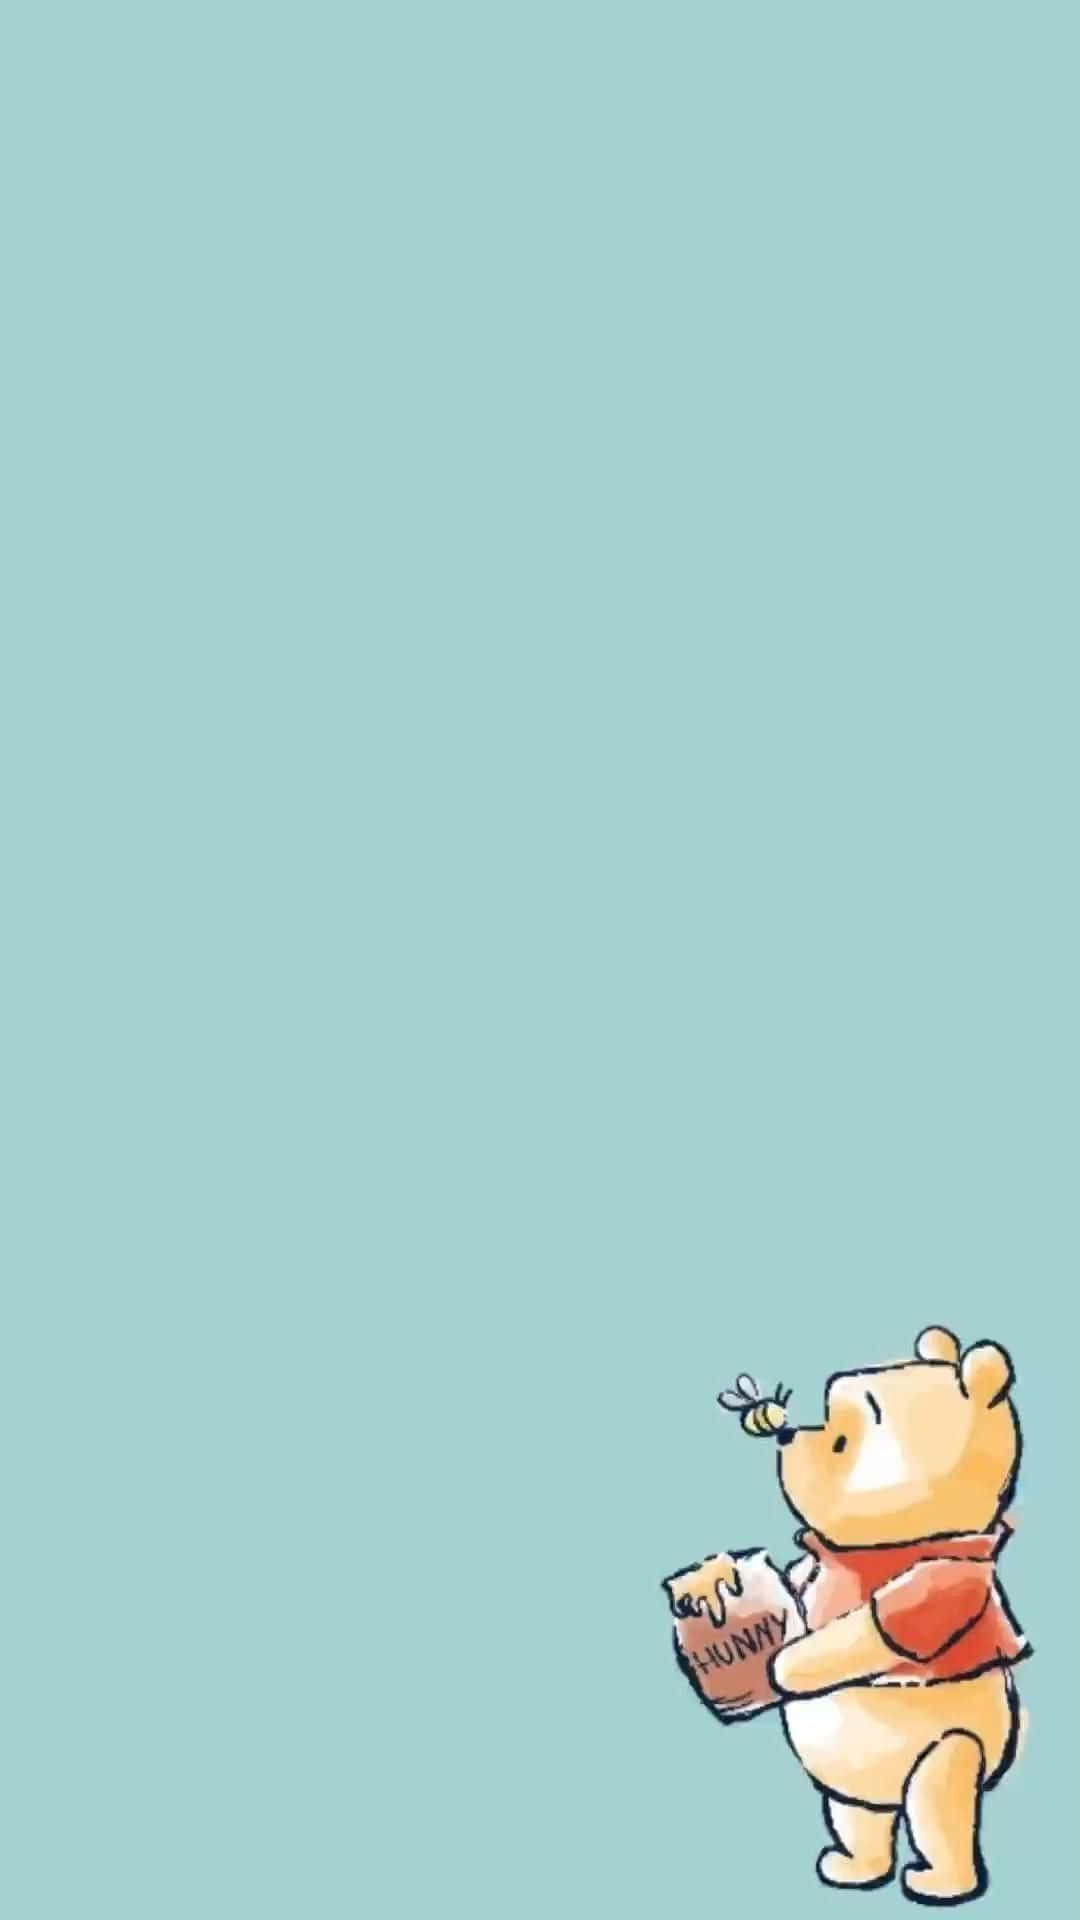 Winnie The Pooh Aesthetic With A Flying Bee Wallpaper